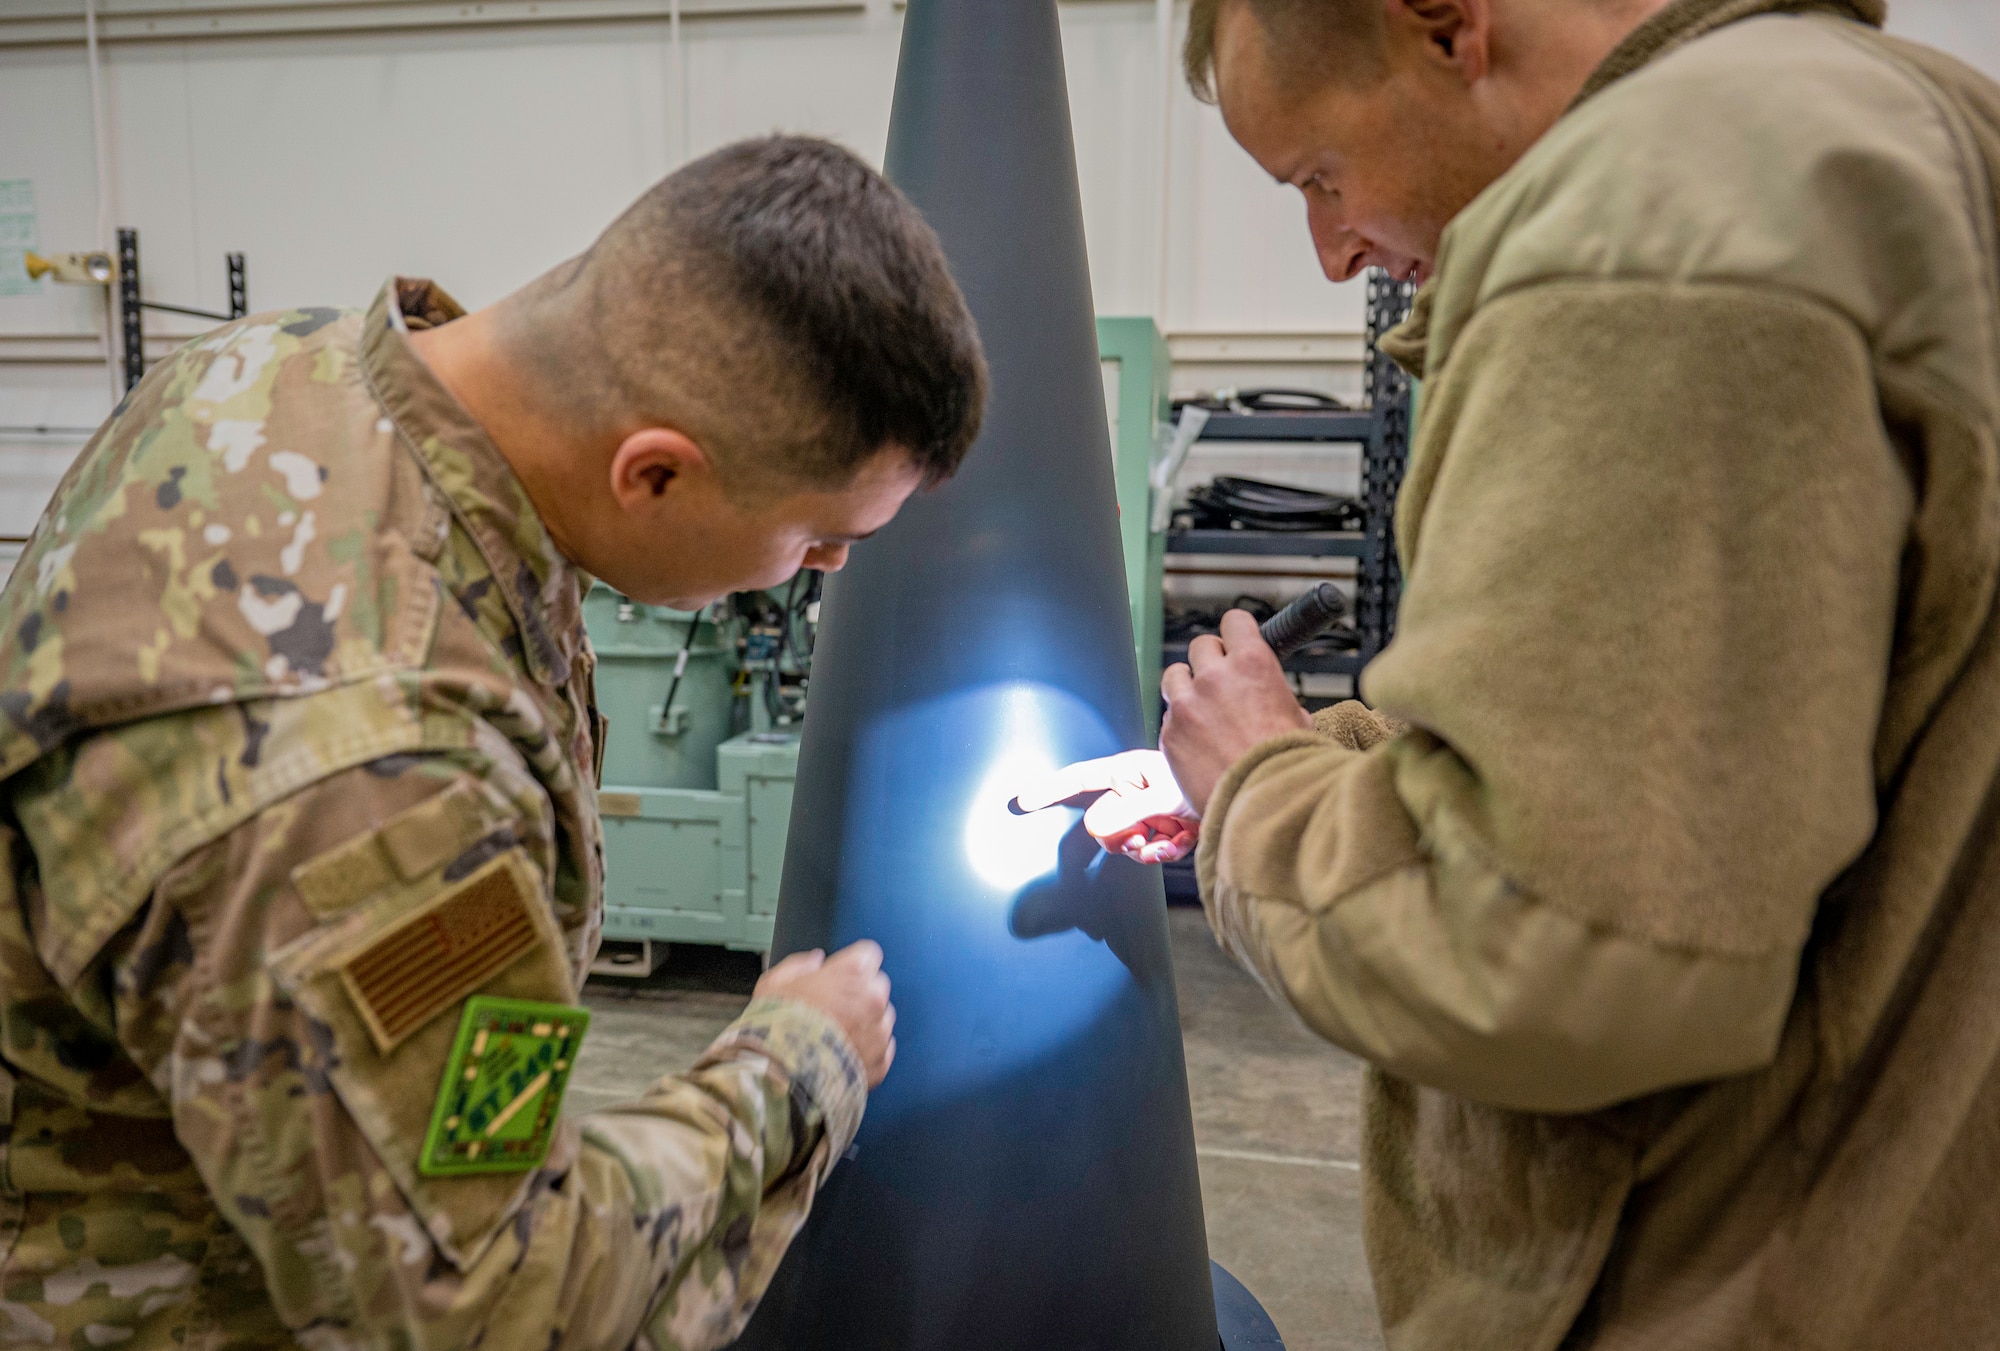 Two people working on a missile’s components